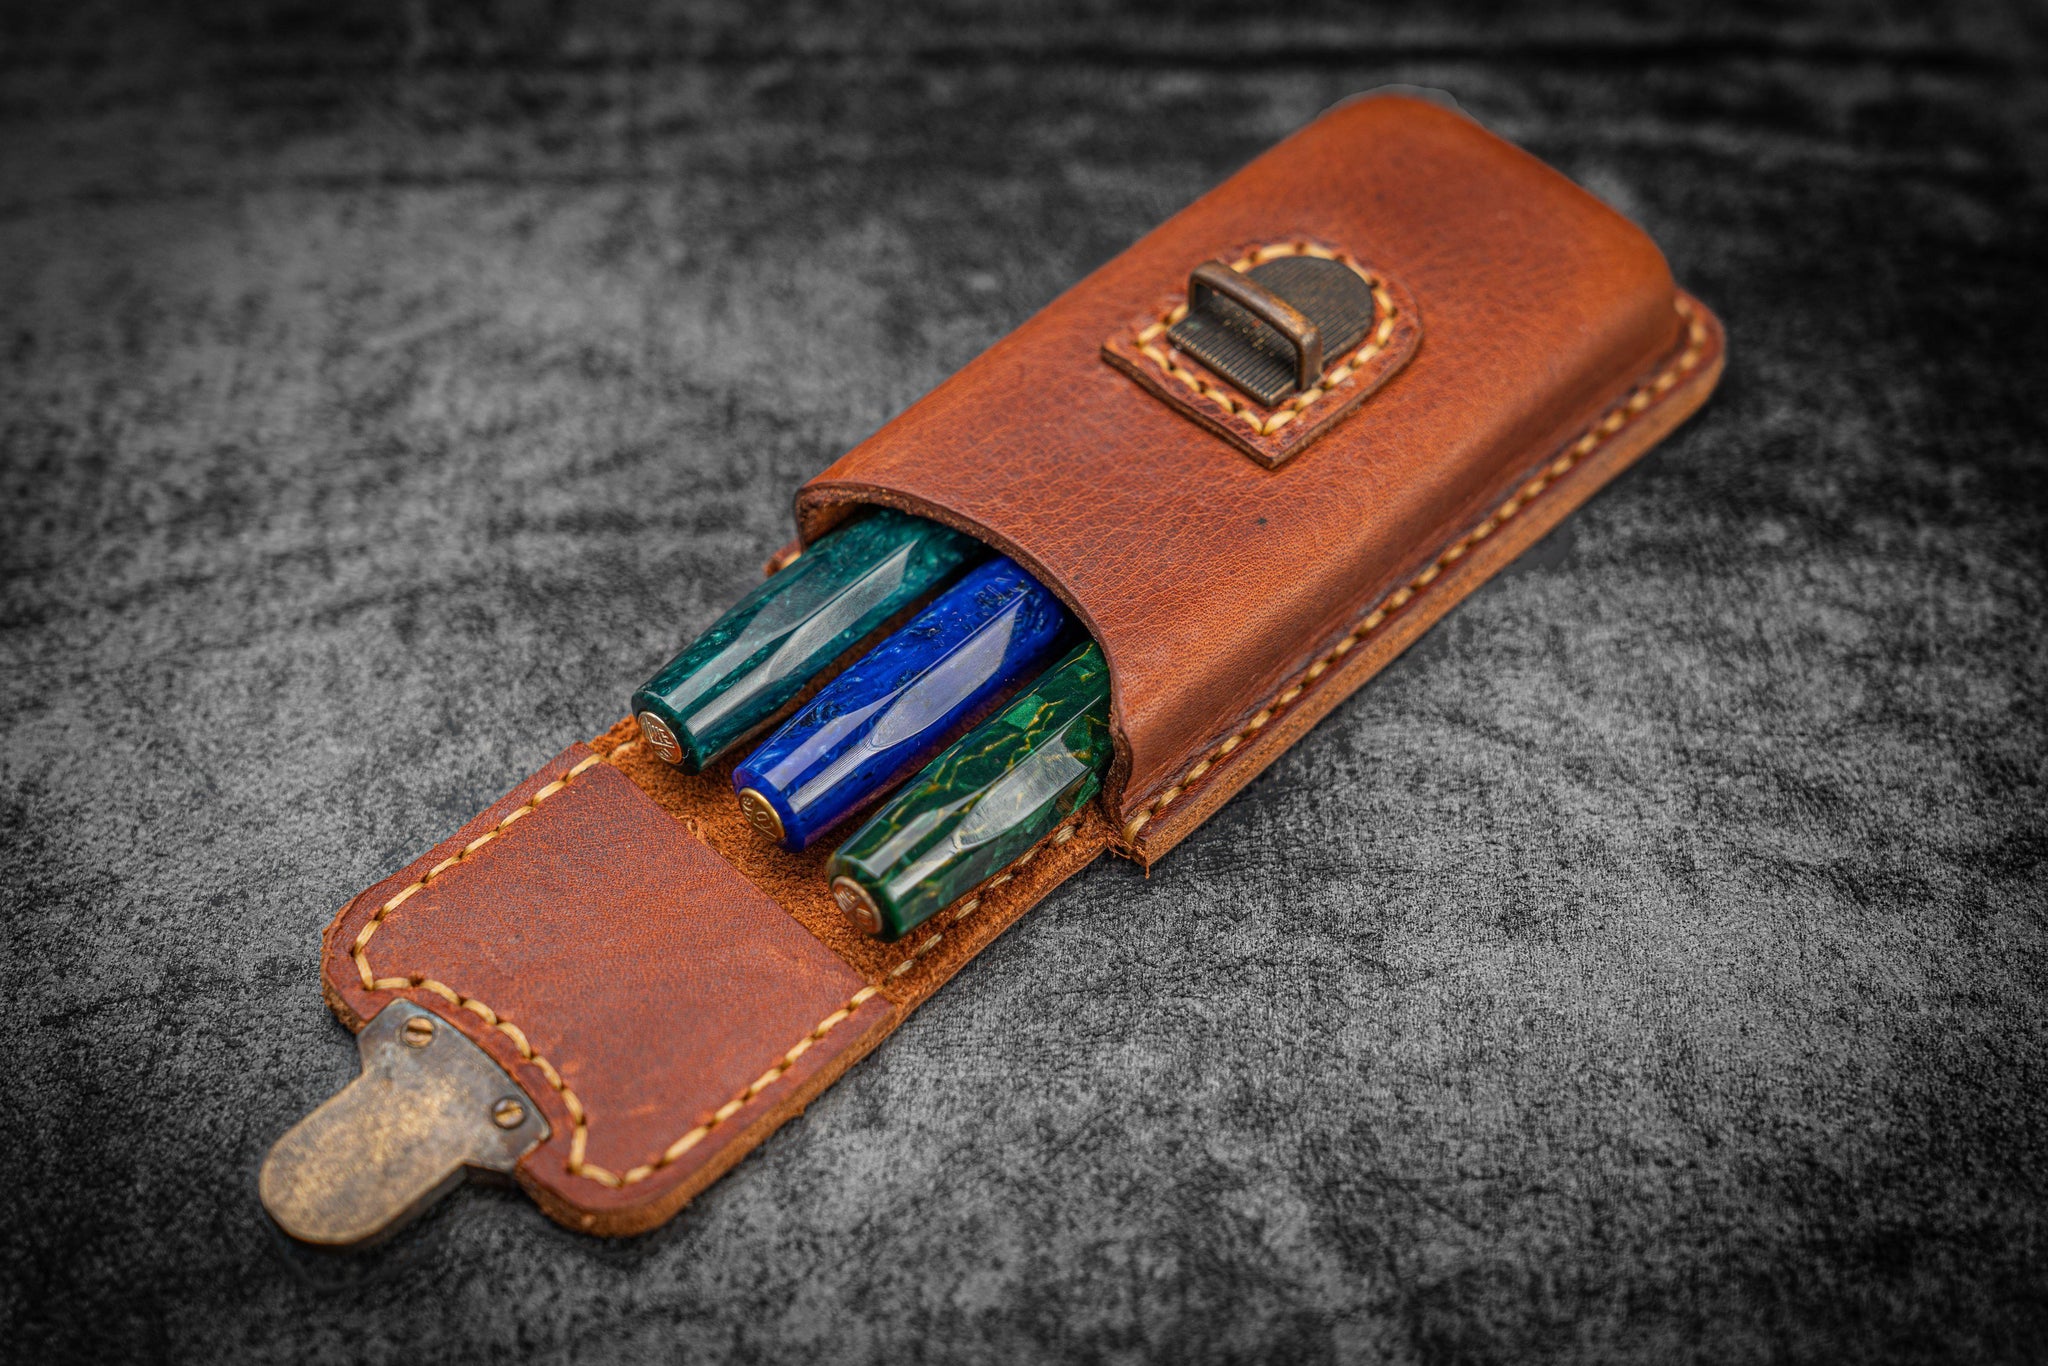 Small leather pen case - S size - 3 colours